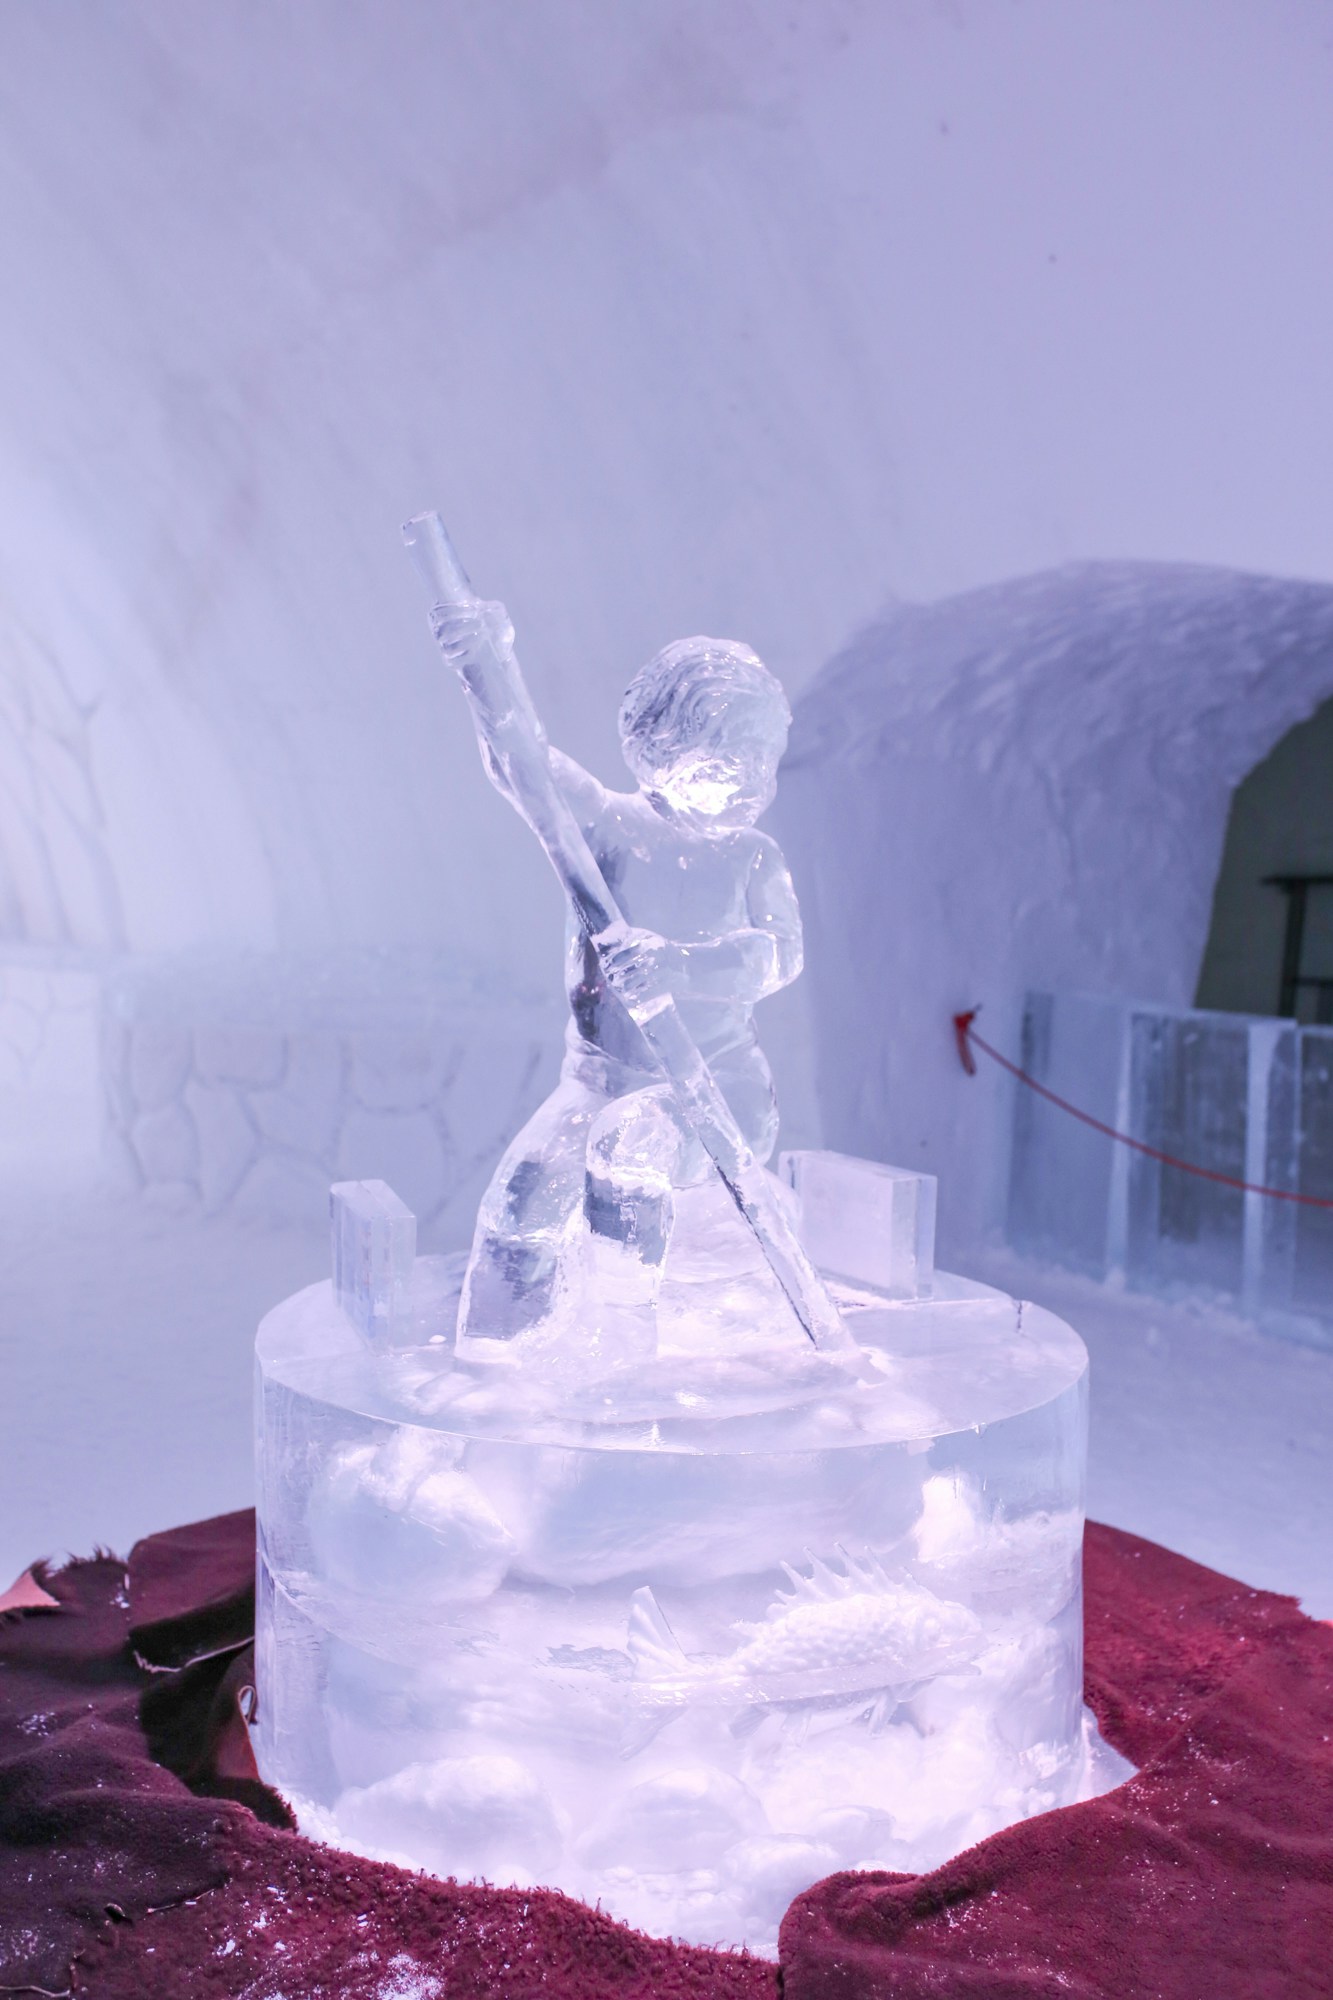 Ice sculptures are so beautiful and expertly crafted at the Hotel de Glâce near Quebec City. 